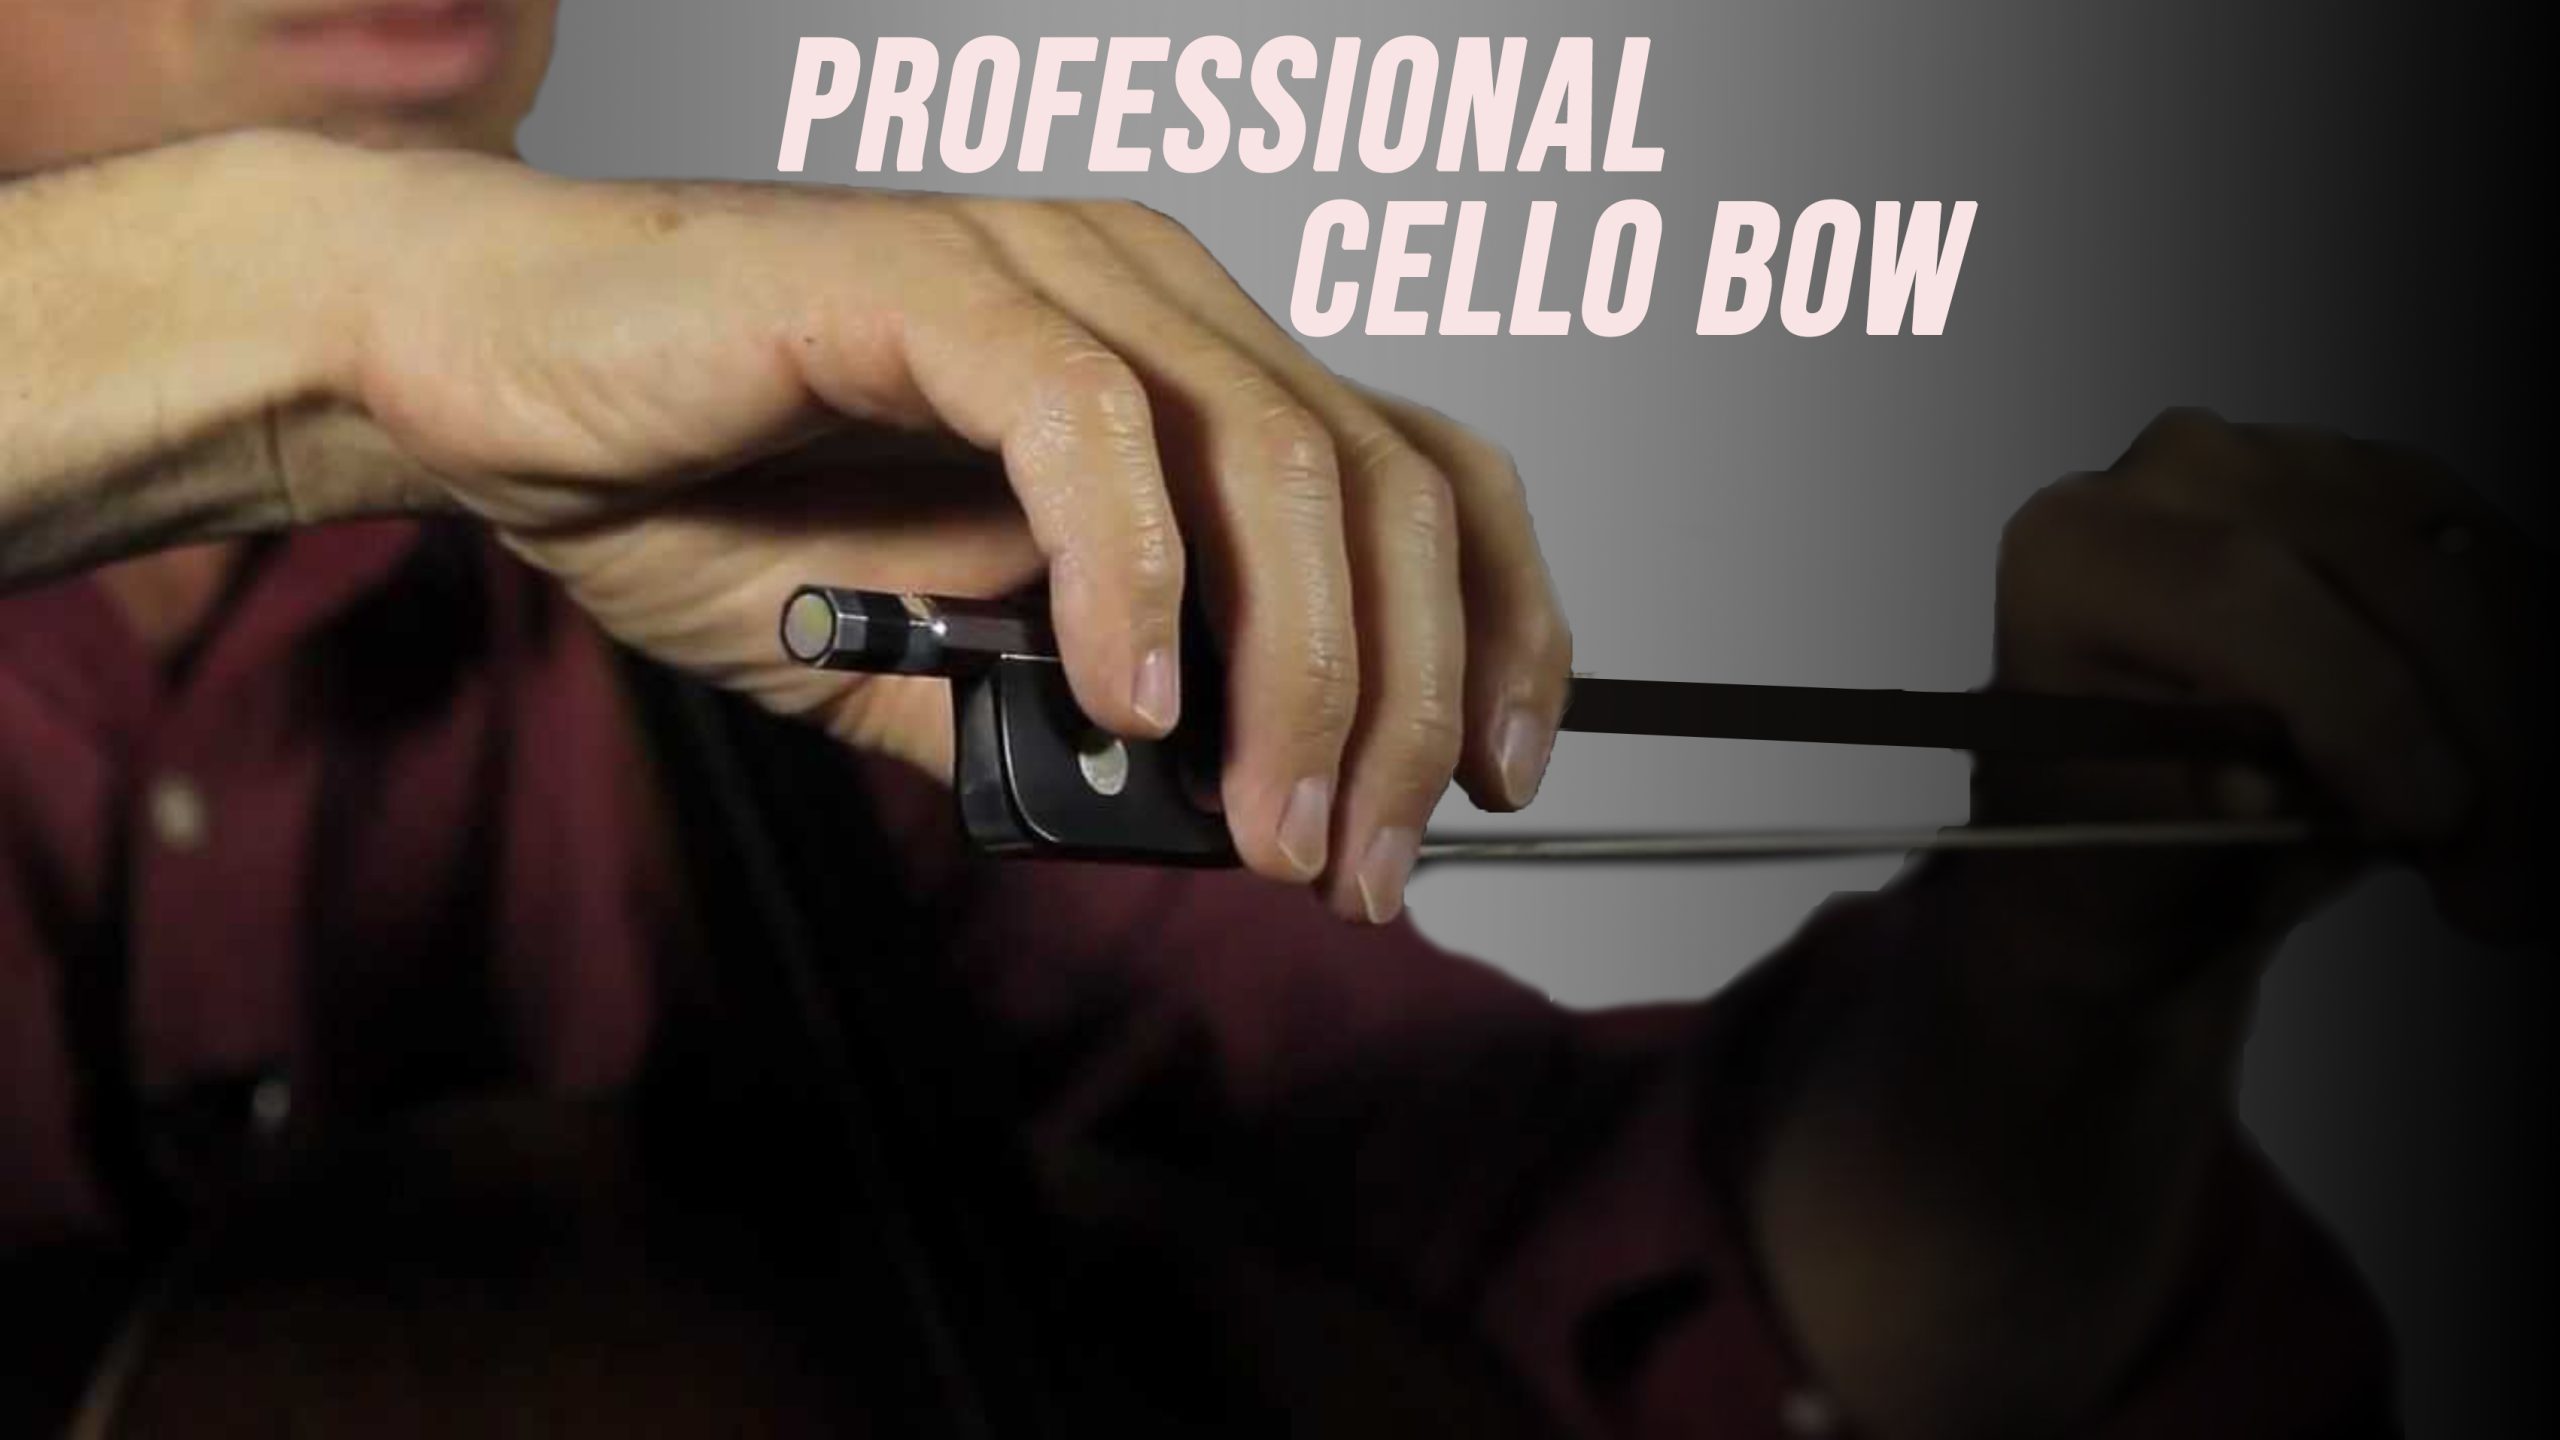 You are currently viewing How to Choose a Professional Cello Bow: A Guide for Cellists